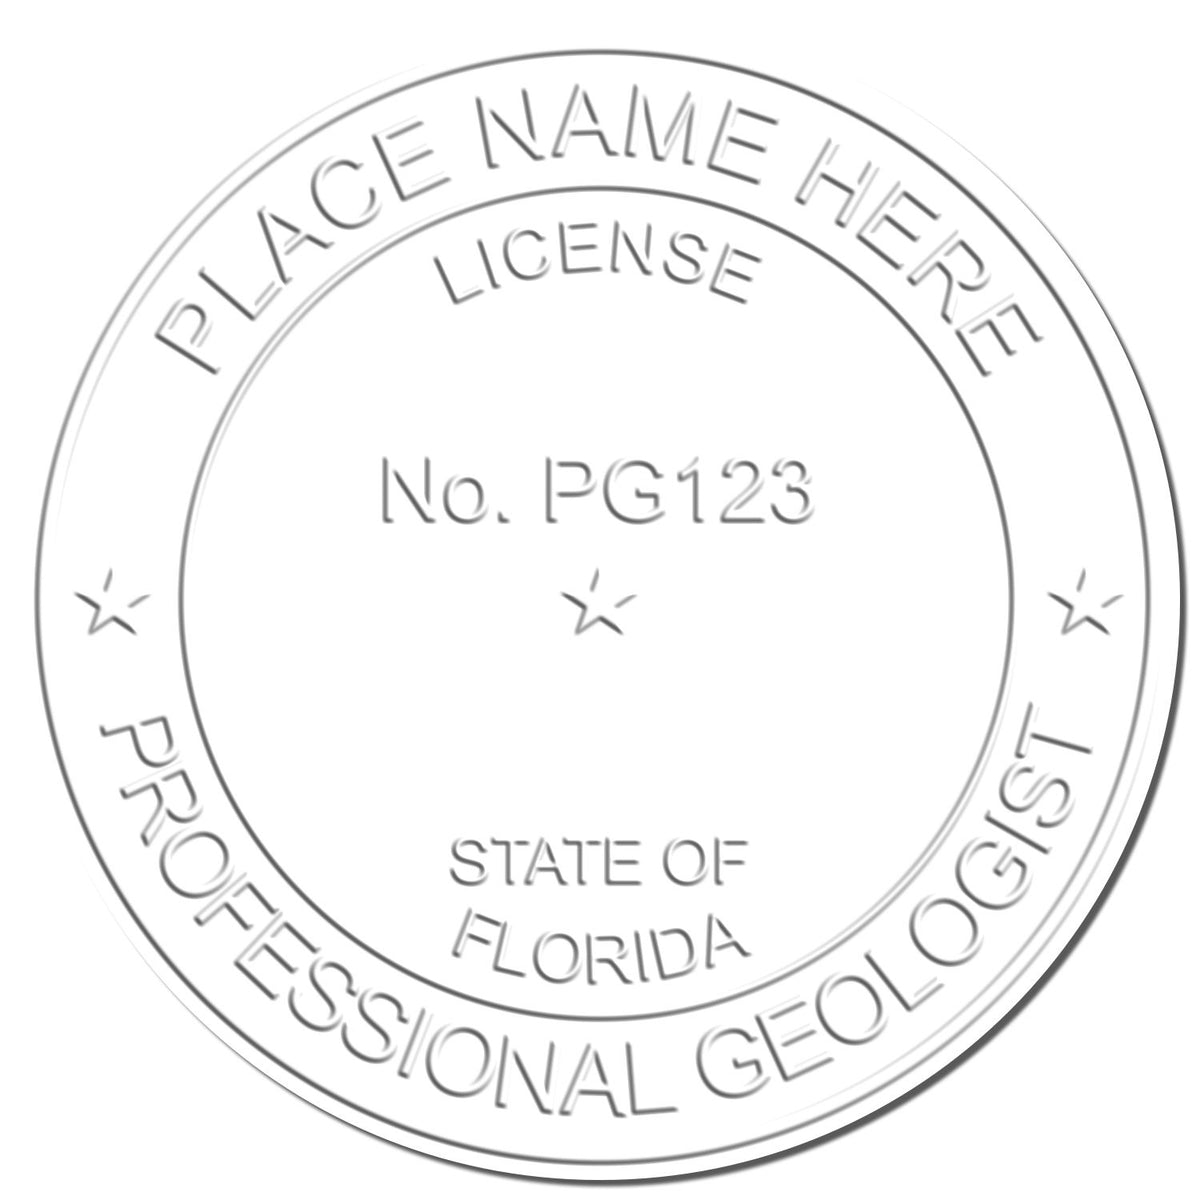 The Florida Geologist Desk Seal stamp impression comes to life with a crisp, detailed image stamped on paper - showcasing true professional quality.